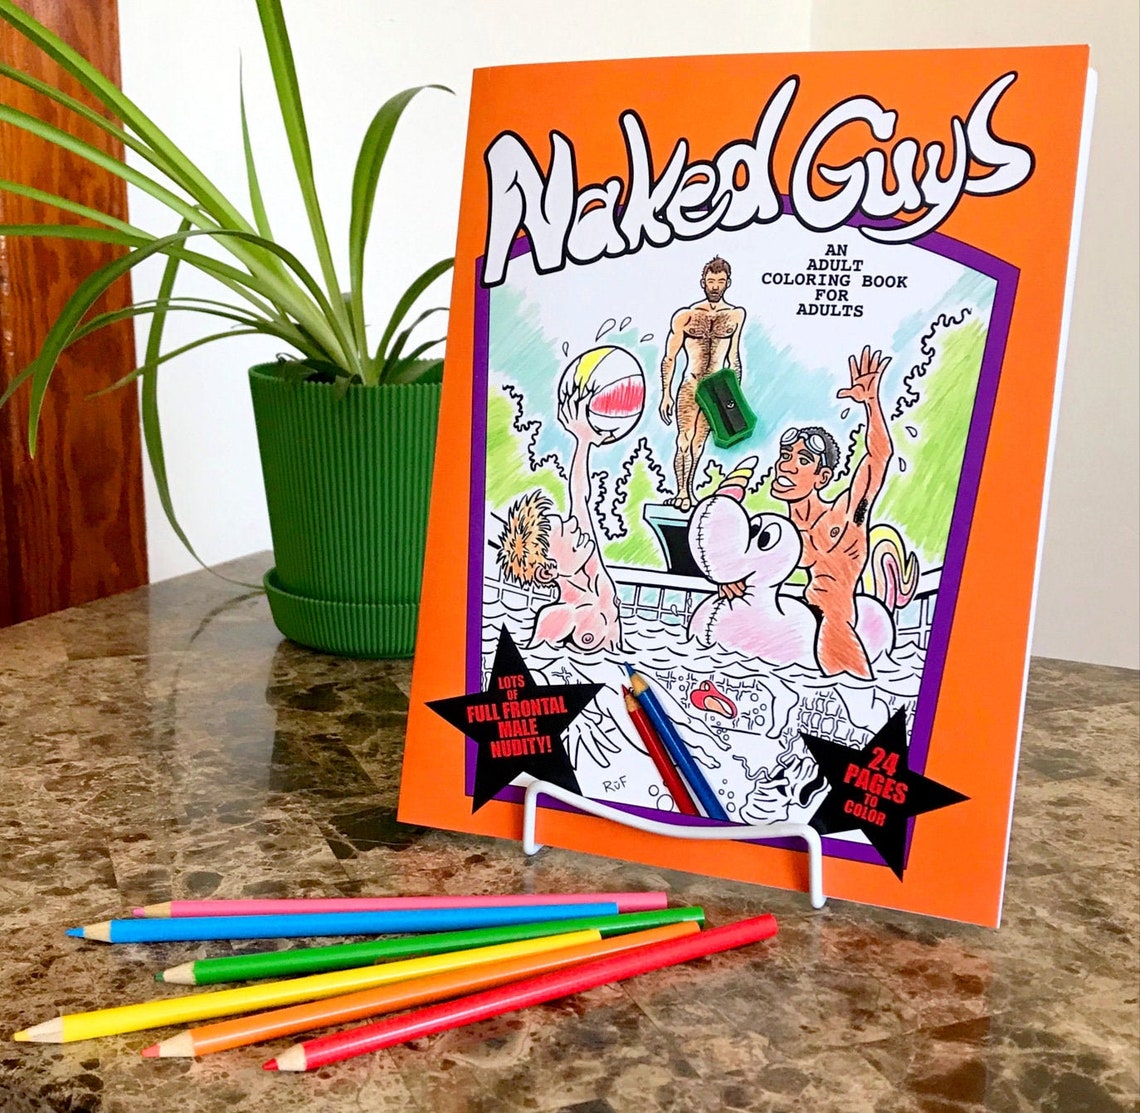 Download NAKED GUYS Adult Coloring Book | Etsy